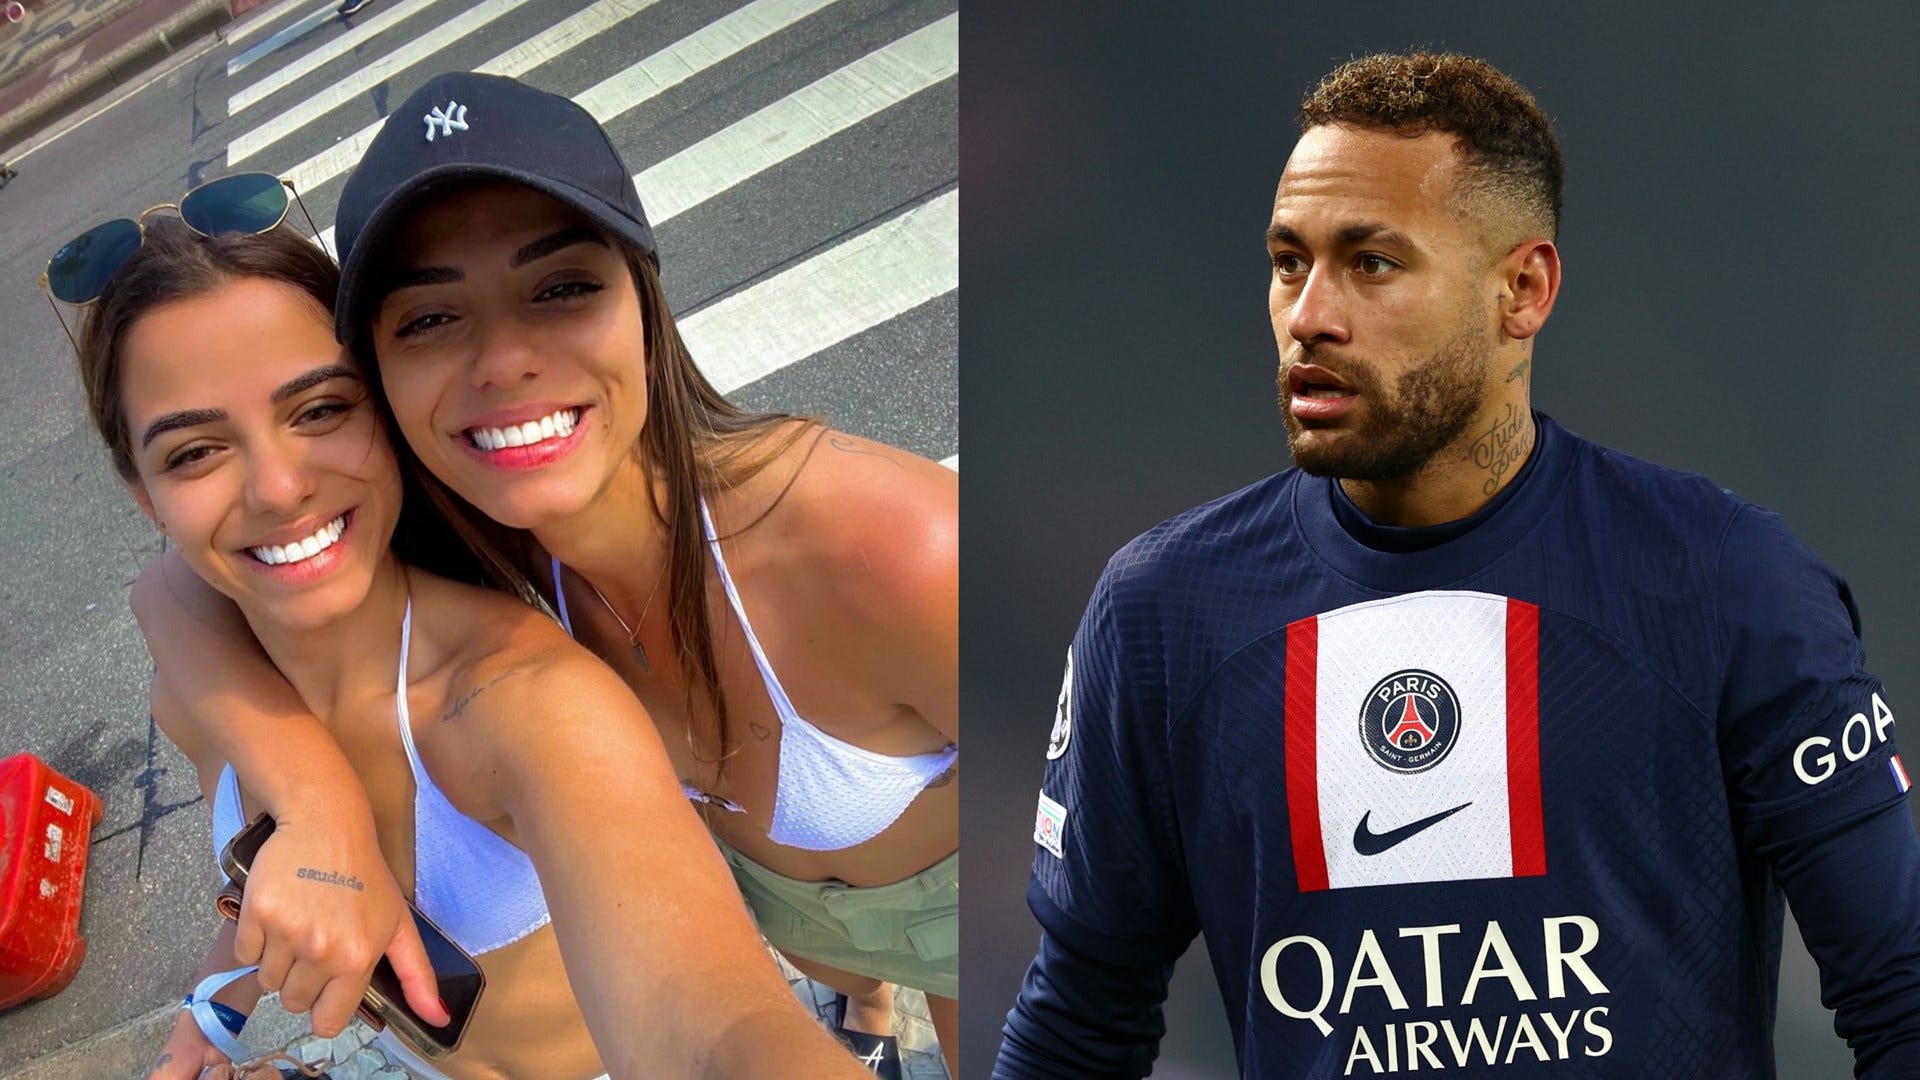 Neymar asked for sex with both of photo pic